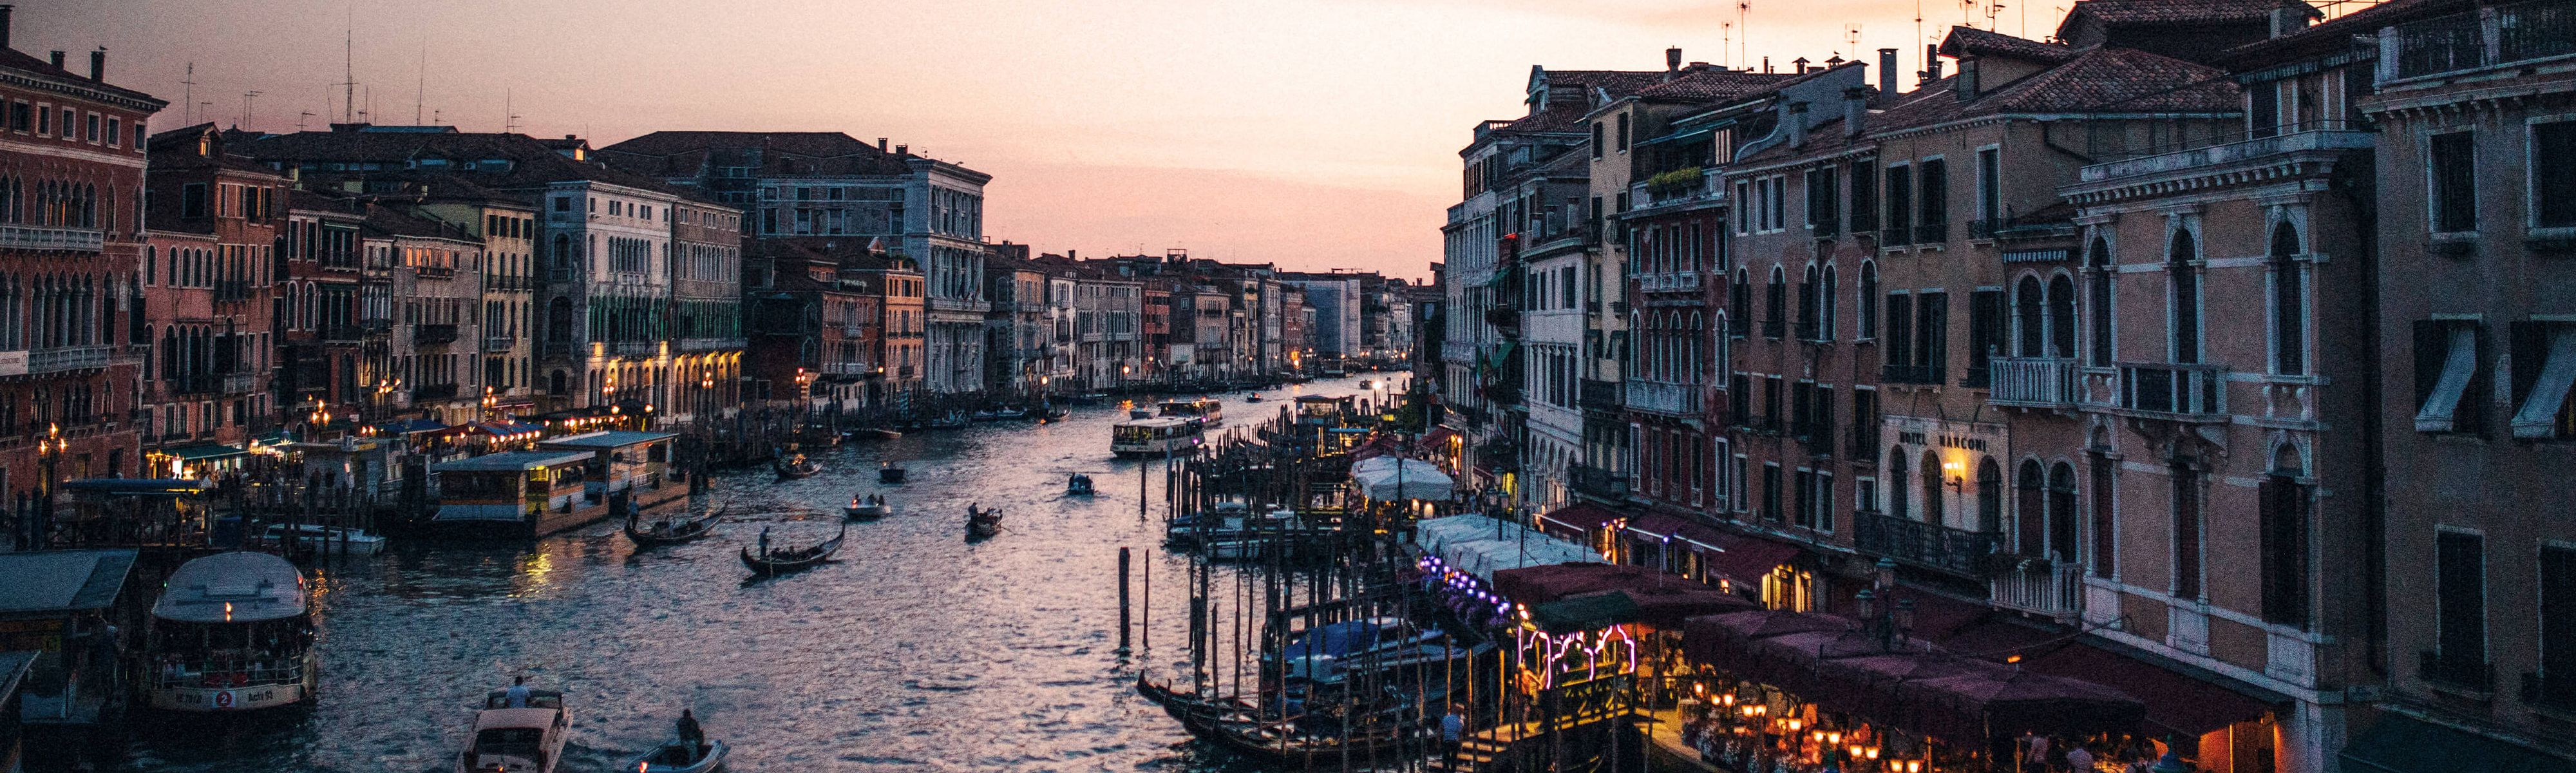 the grand canal of venice at evening